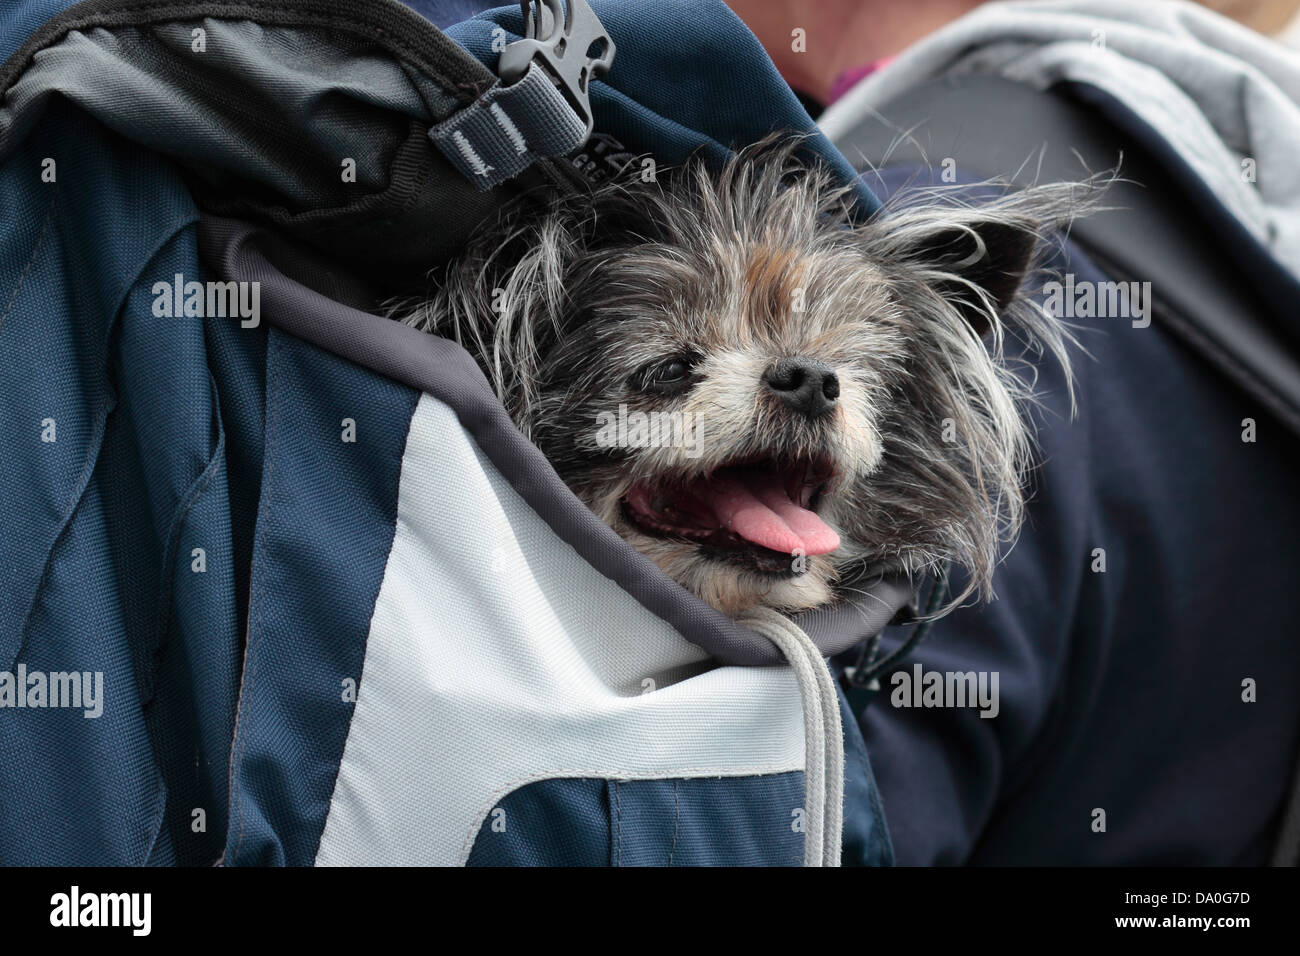 Yorkshire Terrier Chiwawa cross being carried in a back pack Stock Photo